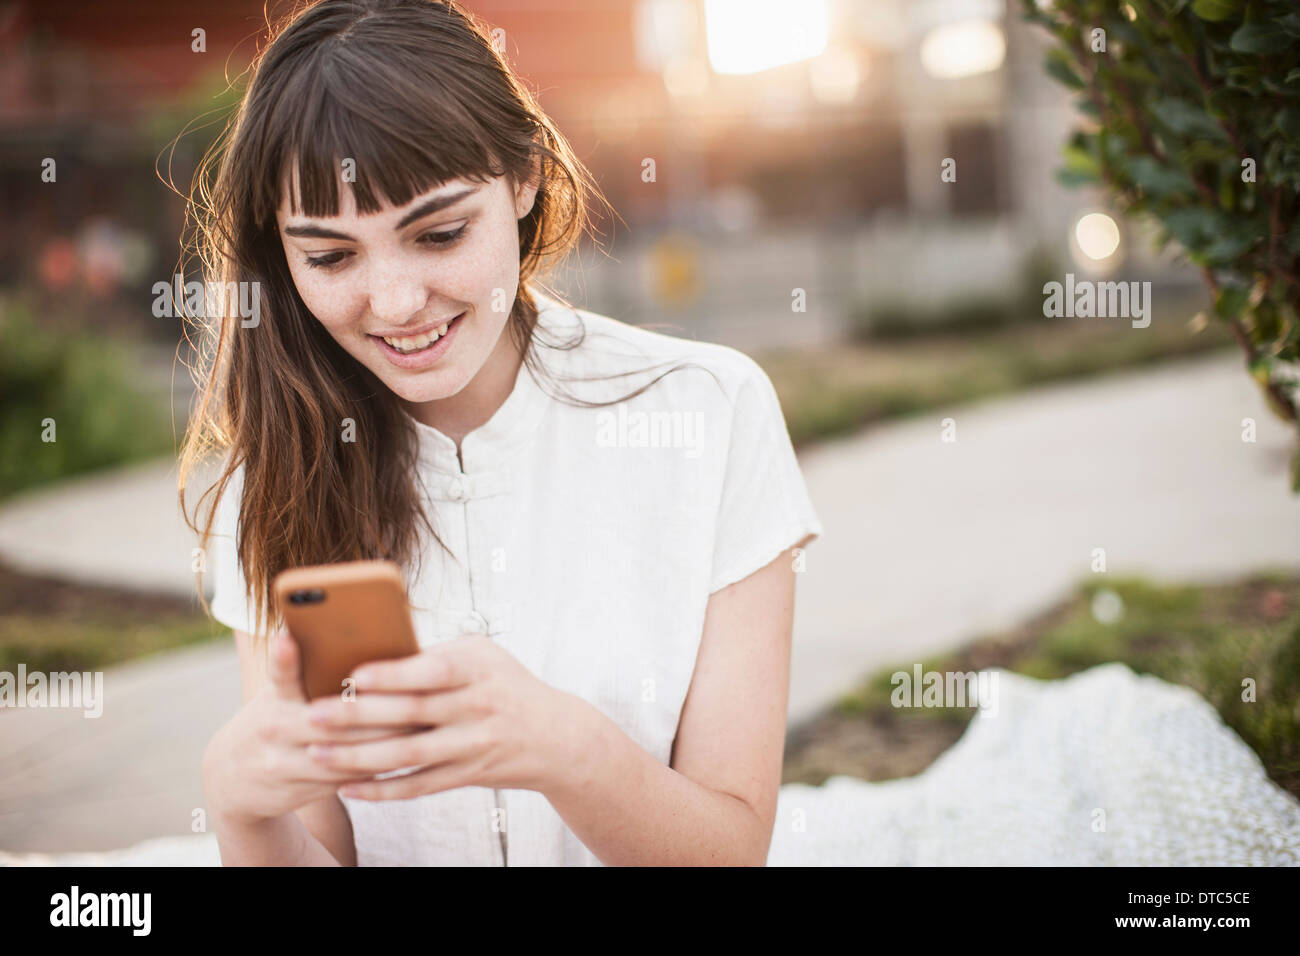 Young woman texting on cellphone Stock Photo